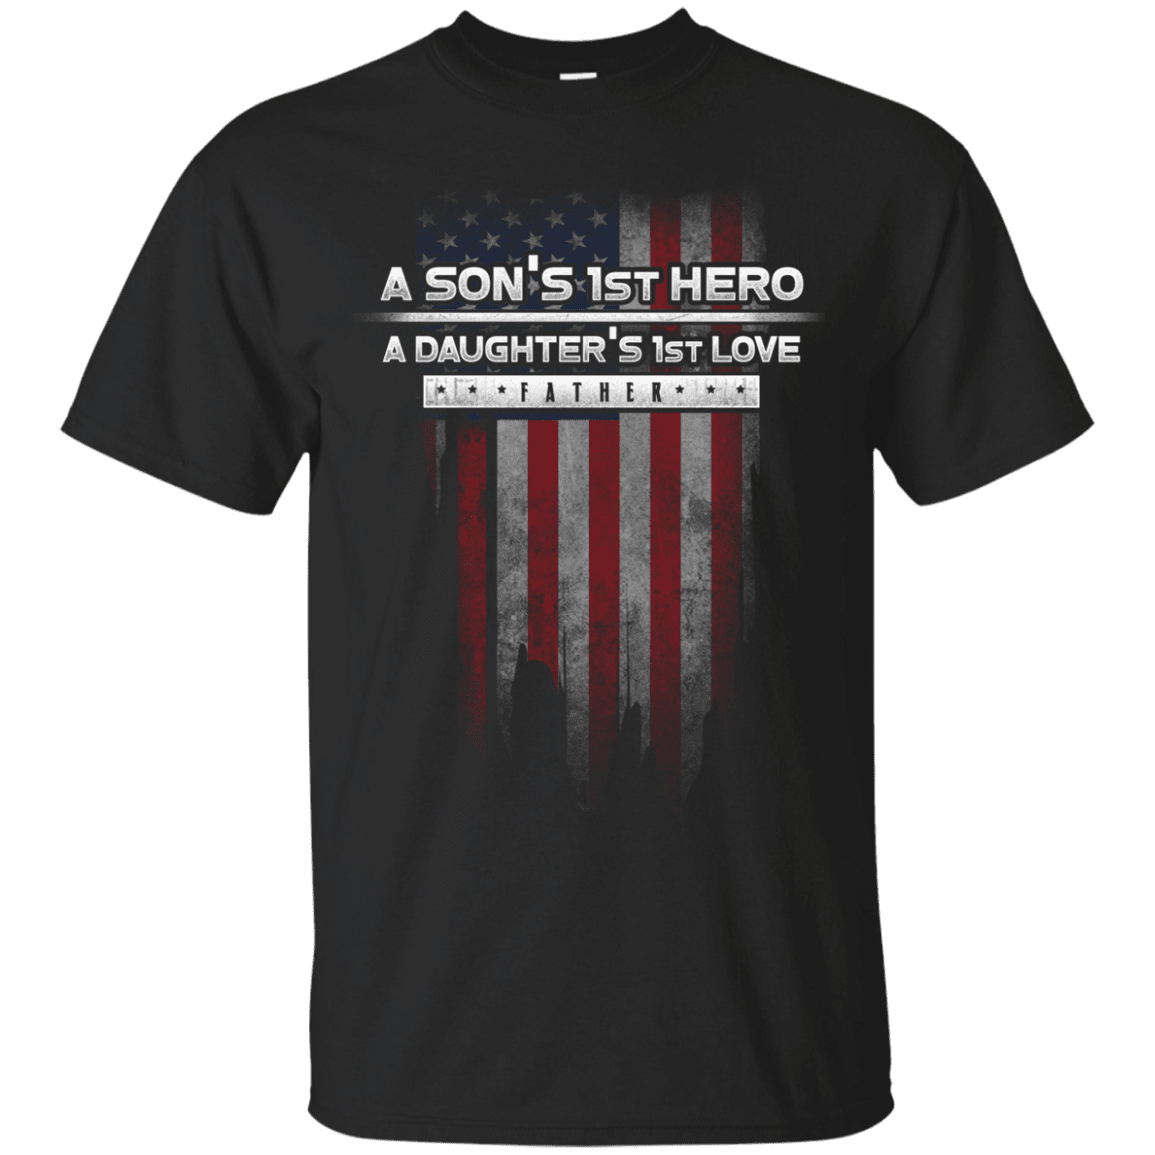 Military T-Shirt ”A Son’s 1st Hero A Daughter’s 1st Love – Father”